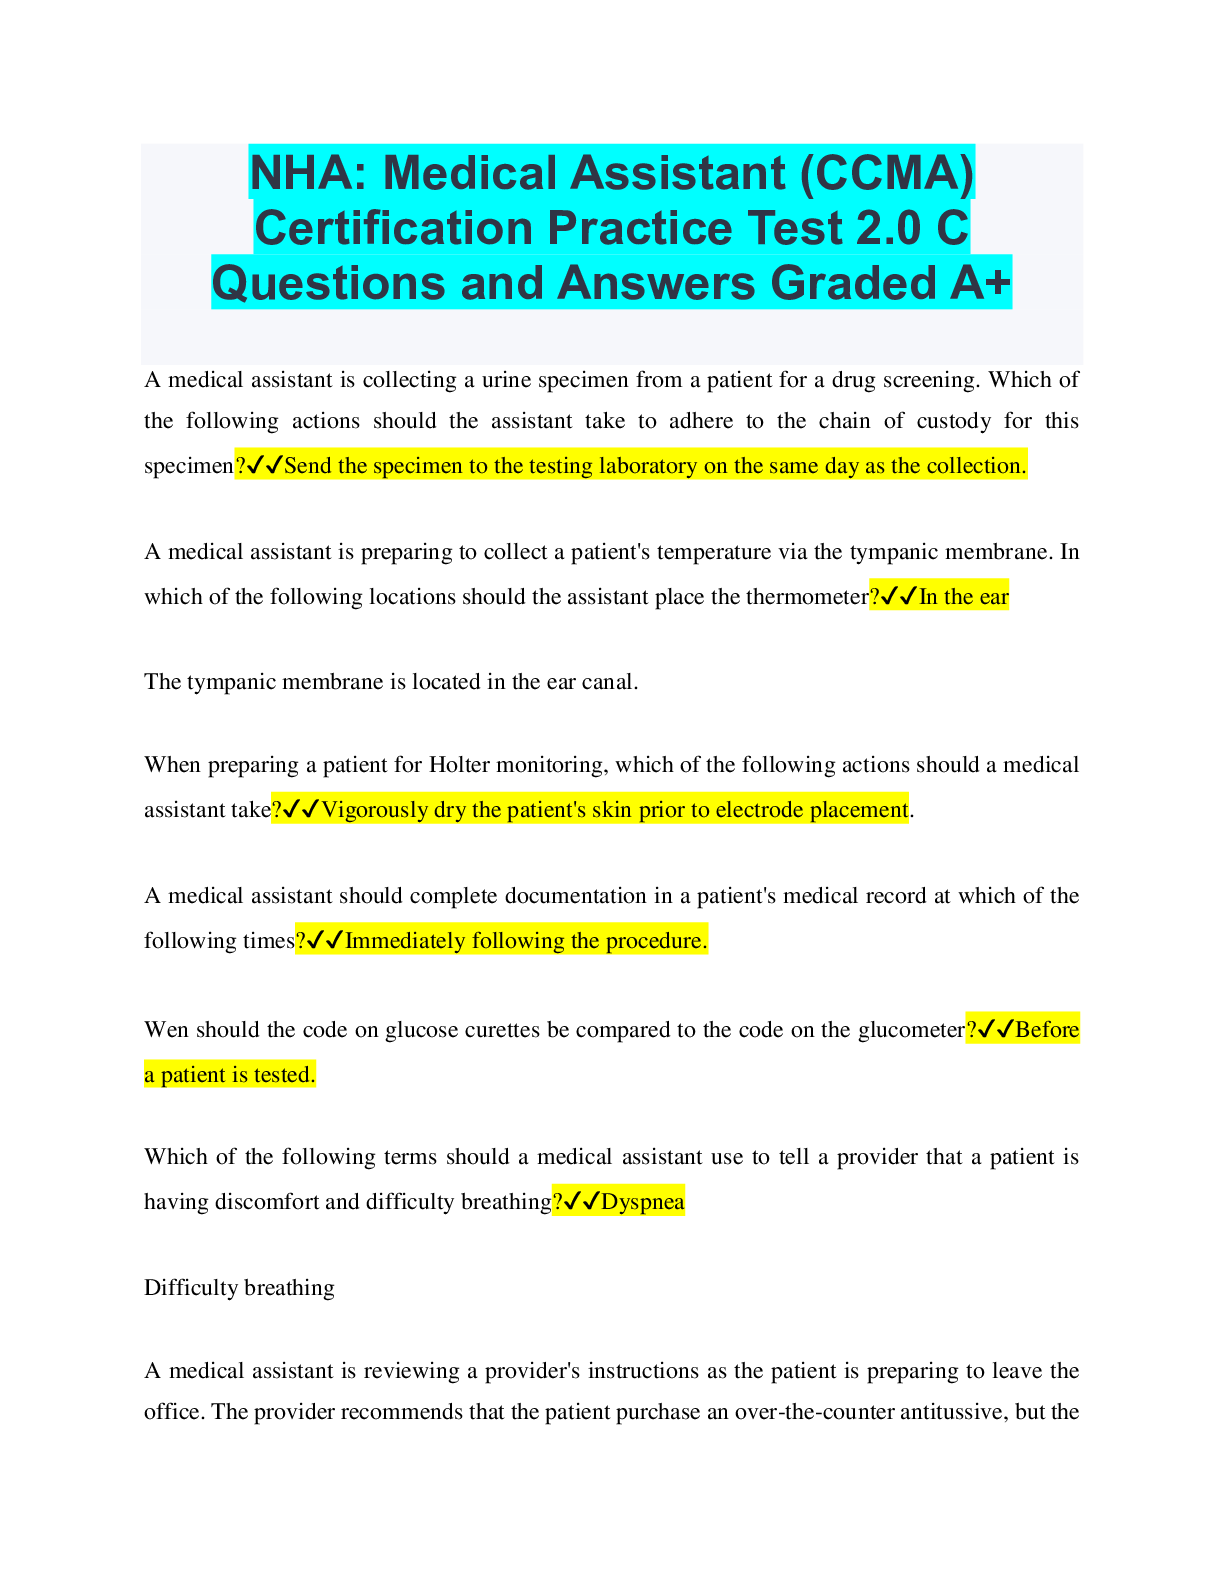 NHA Medical Assistant (CCMA) Certification Practice Test 2.0 C